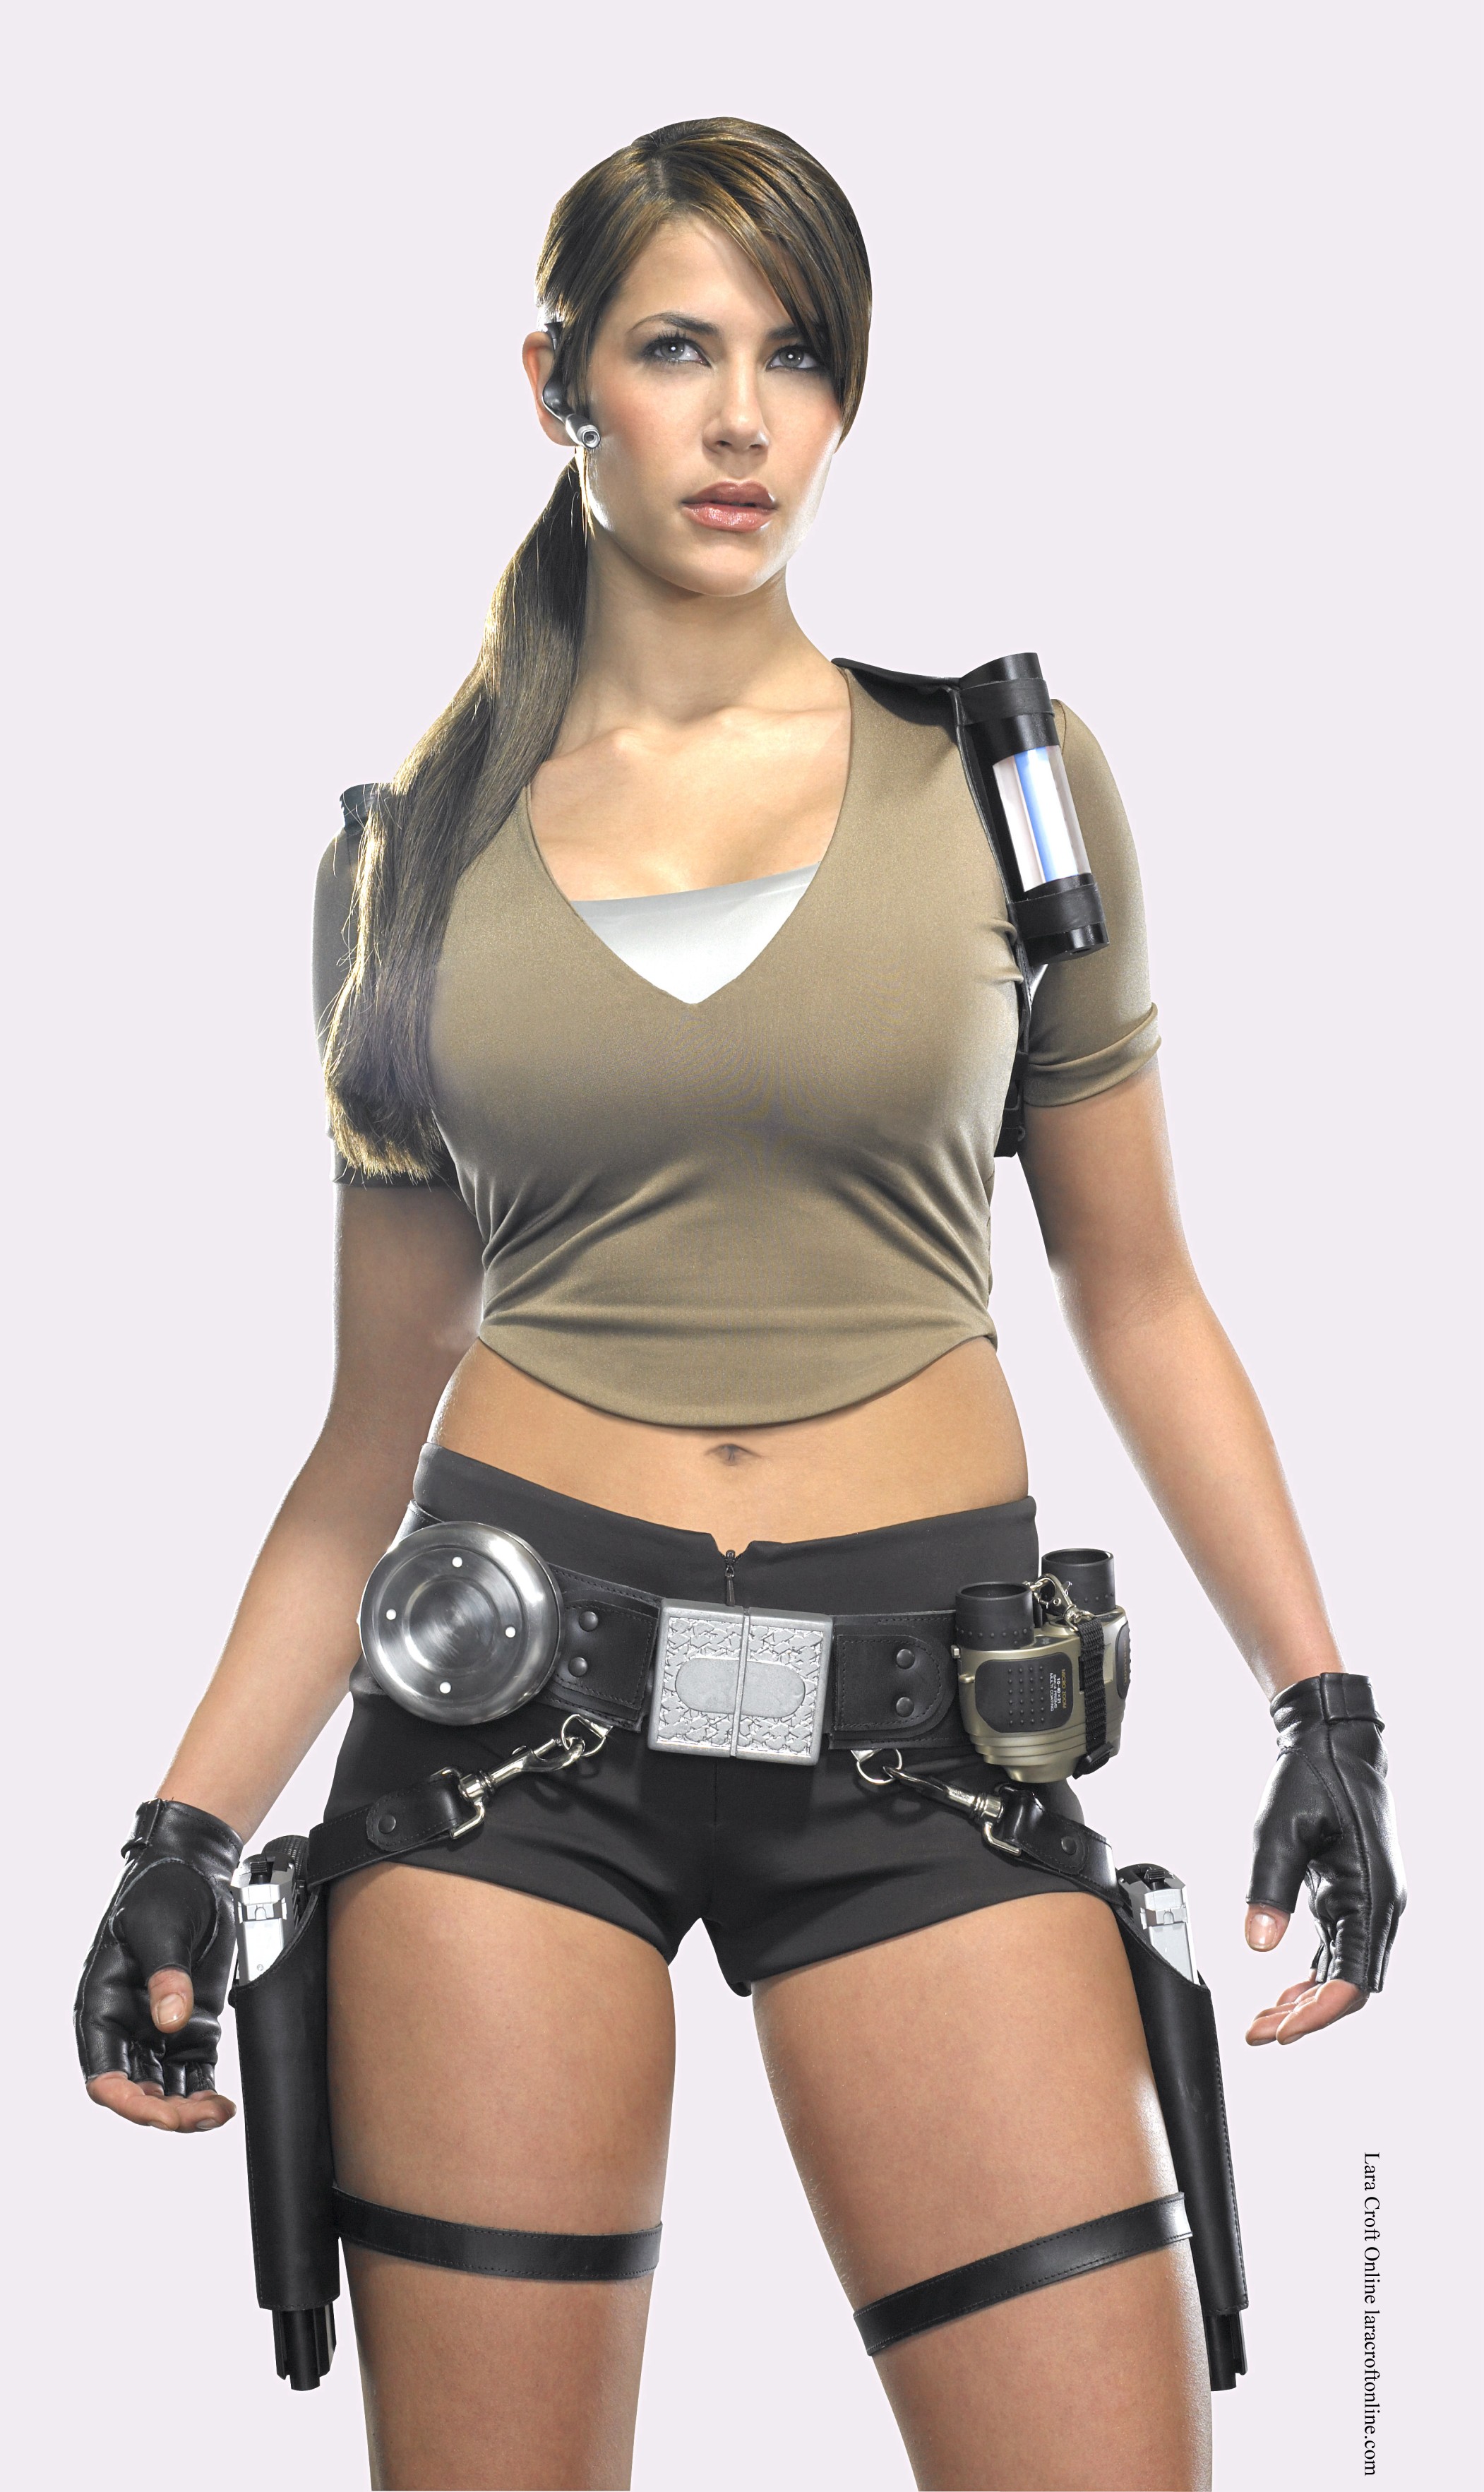 Tomb Raider The Official Models Picture Gallery Section 